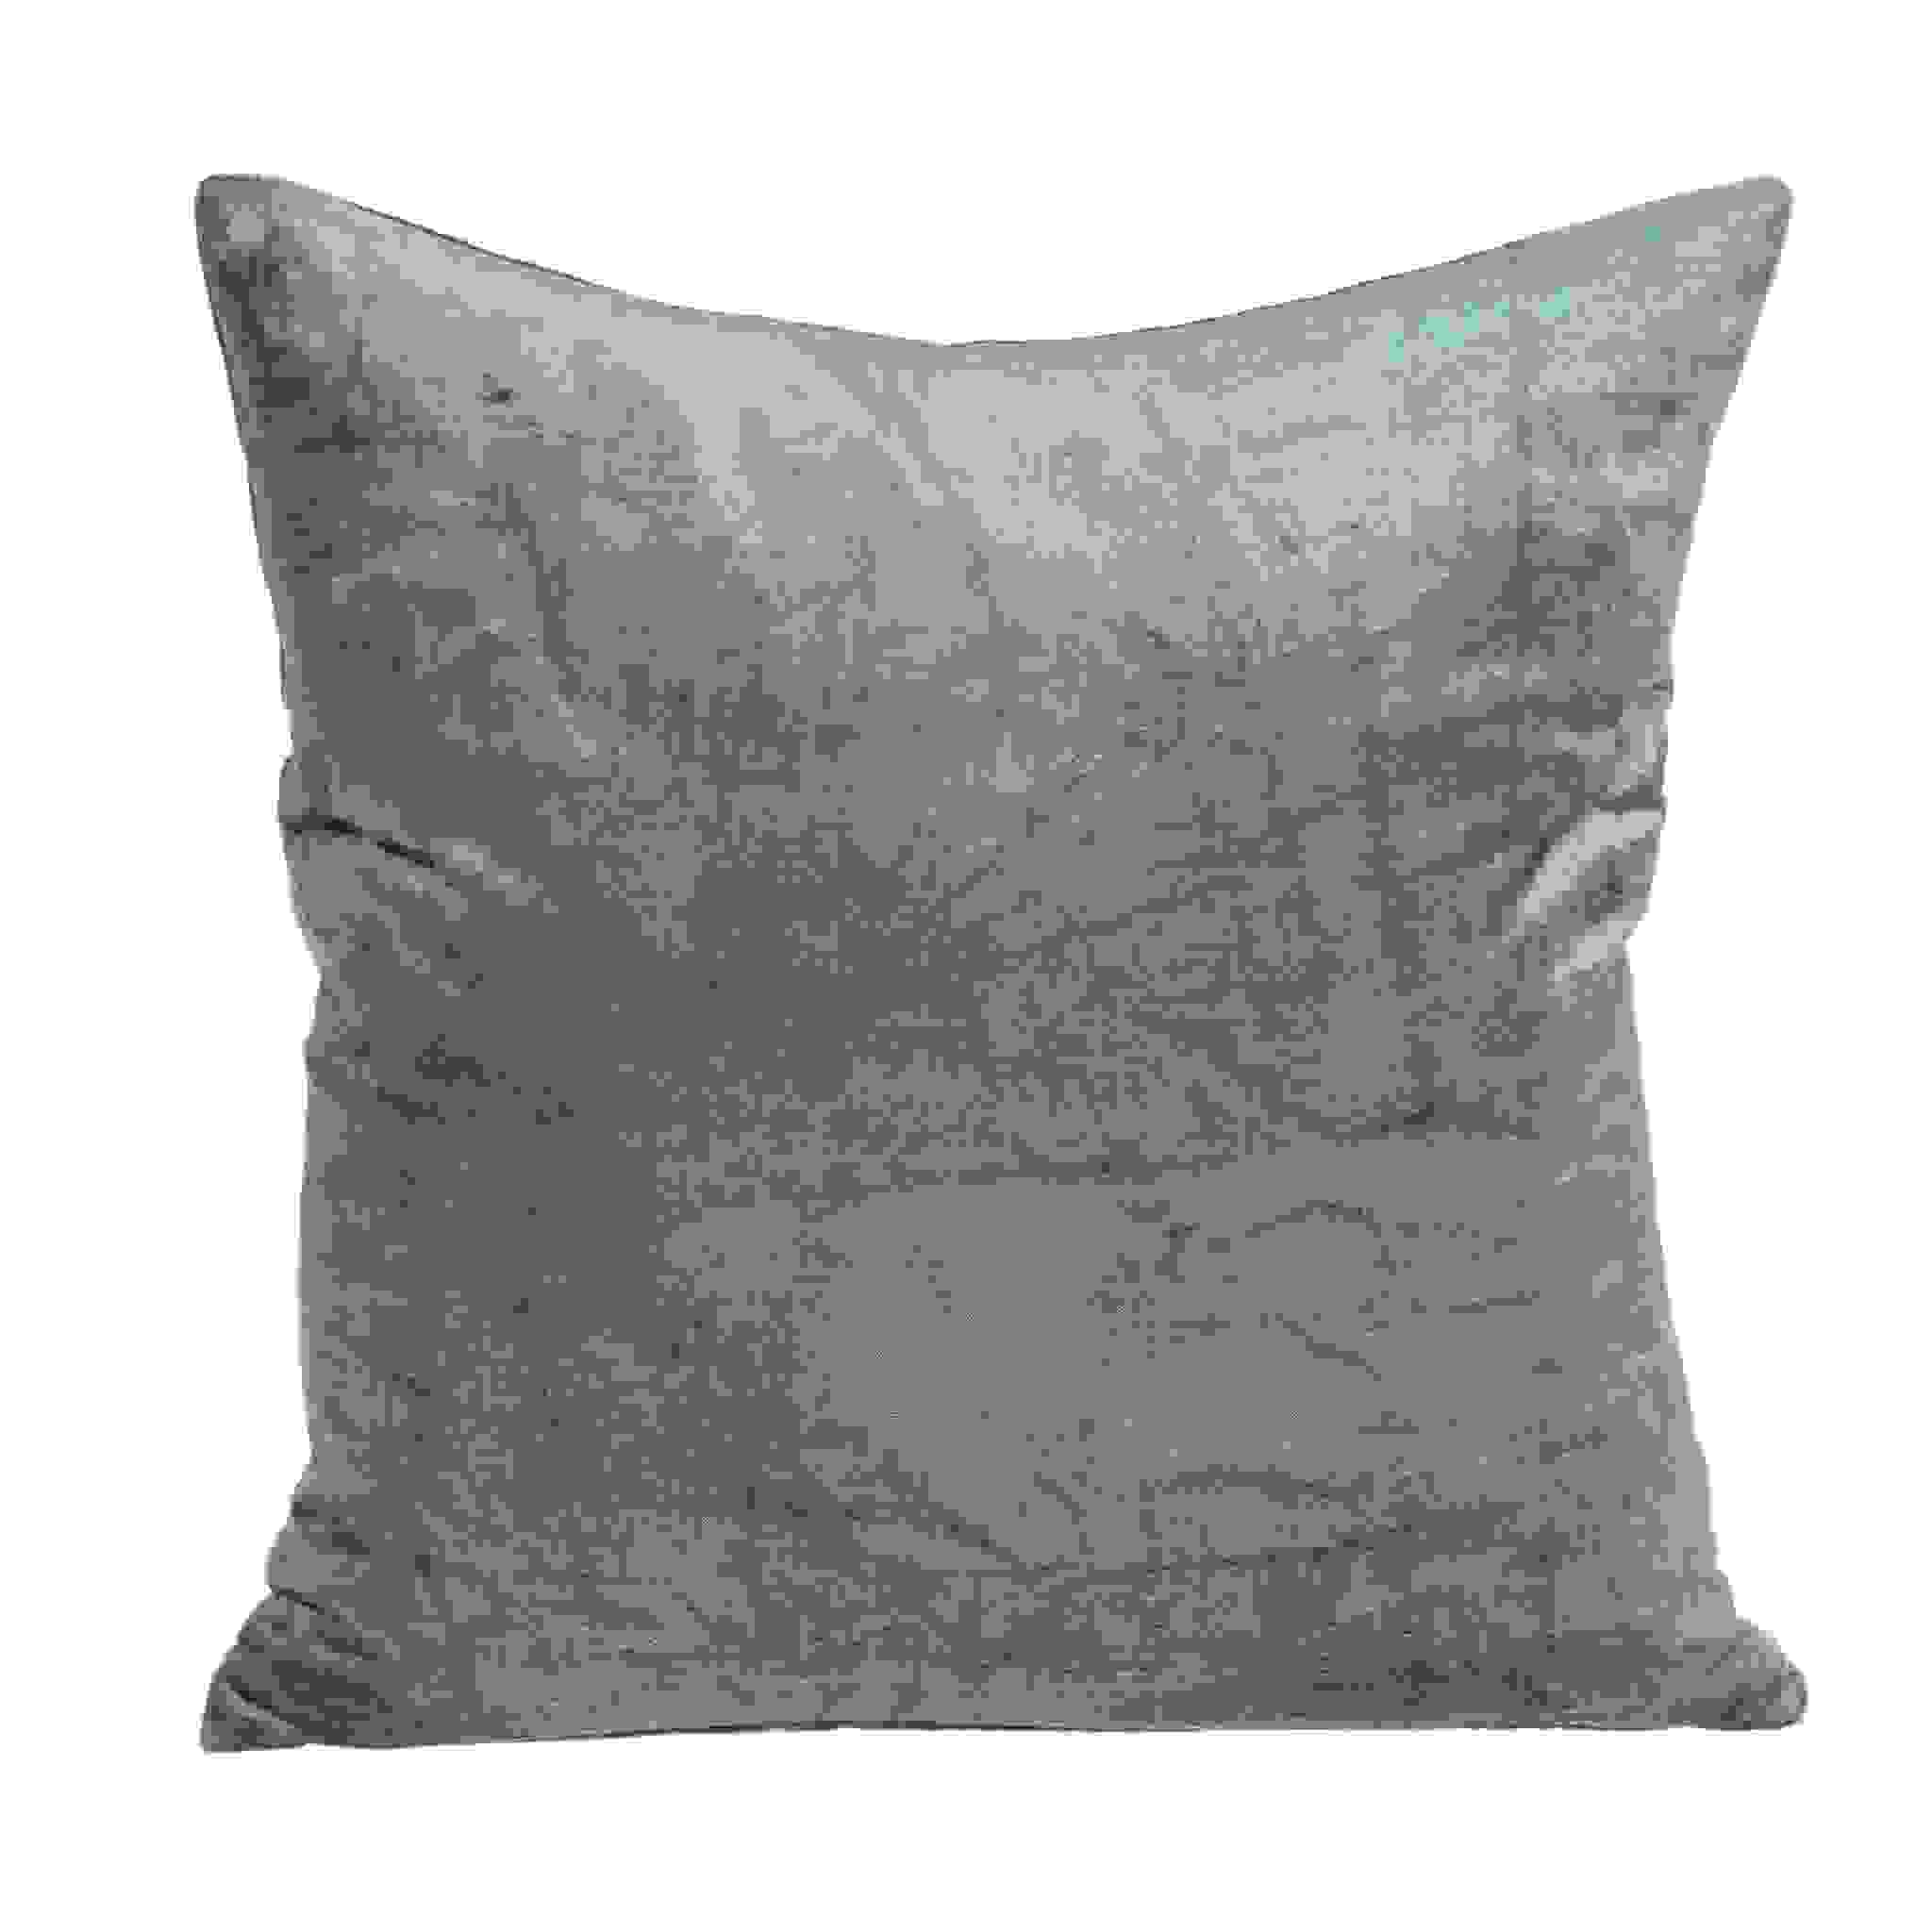 18" x 0.5" x 18" Transitional Green Solid Pillow Cover